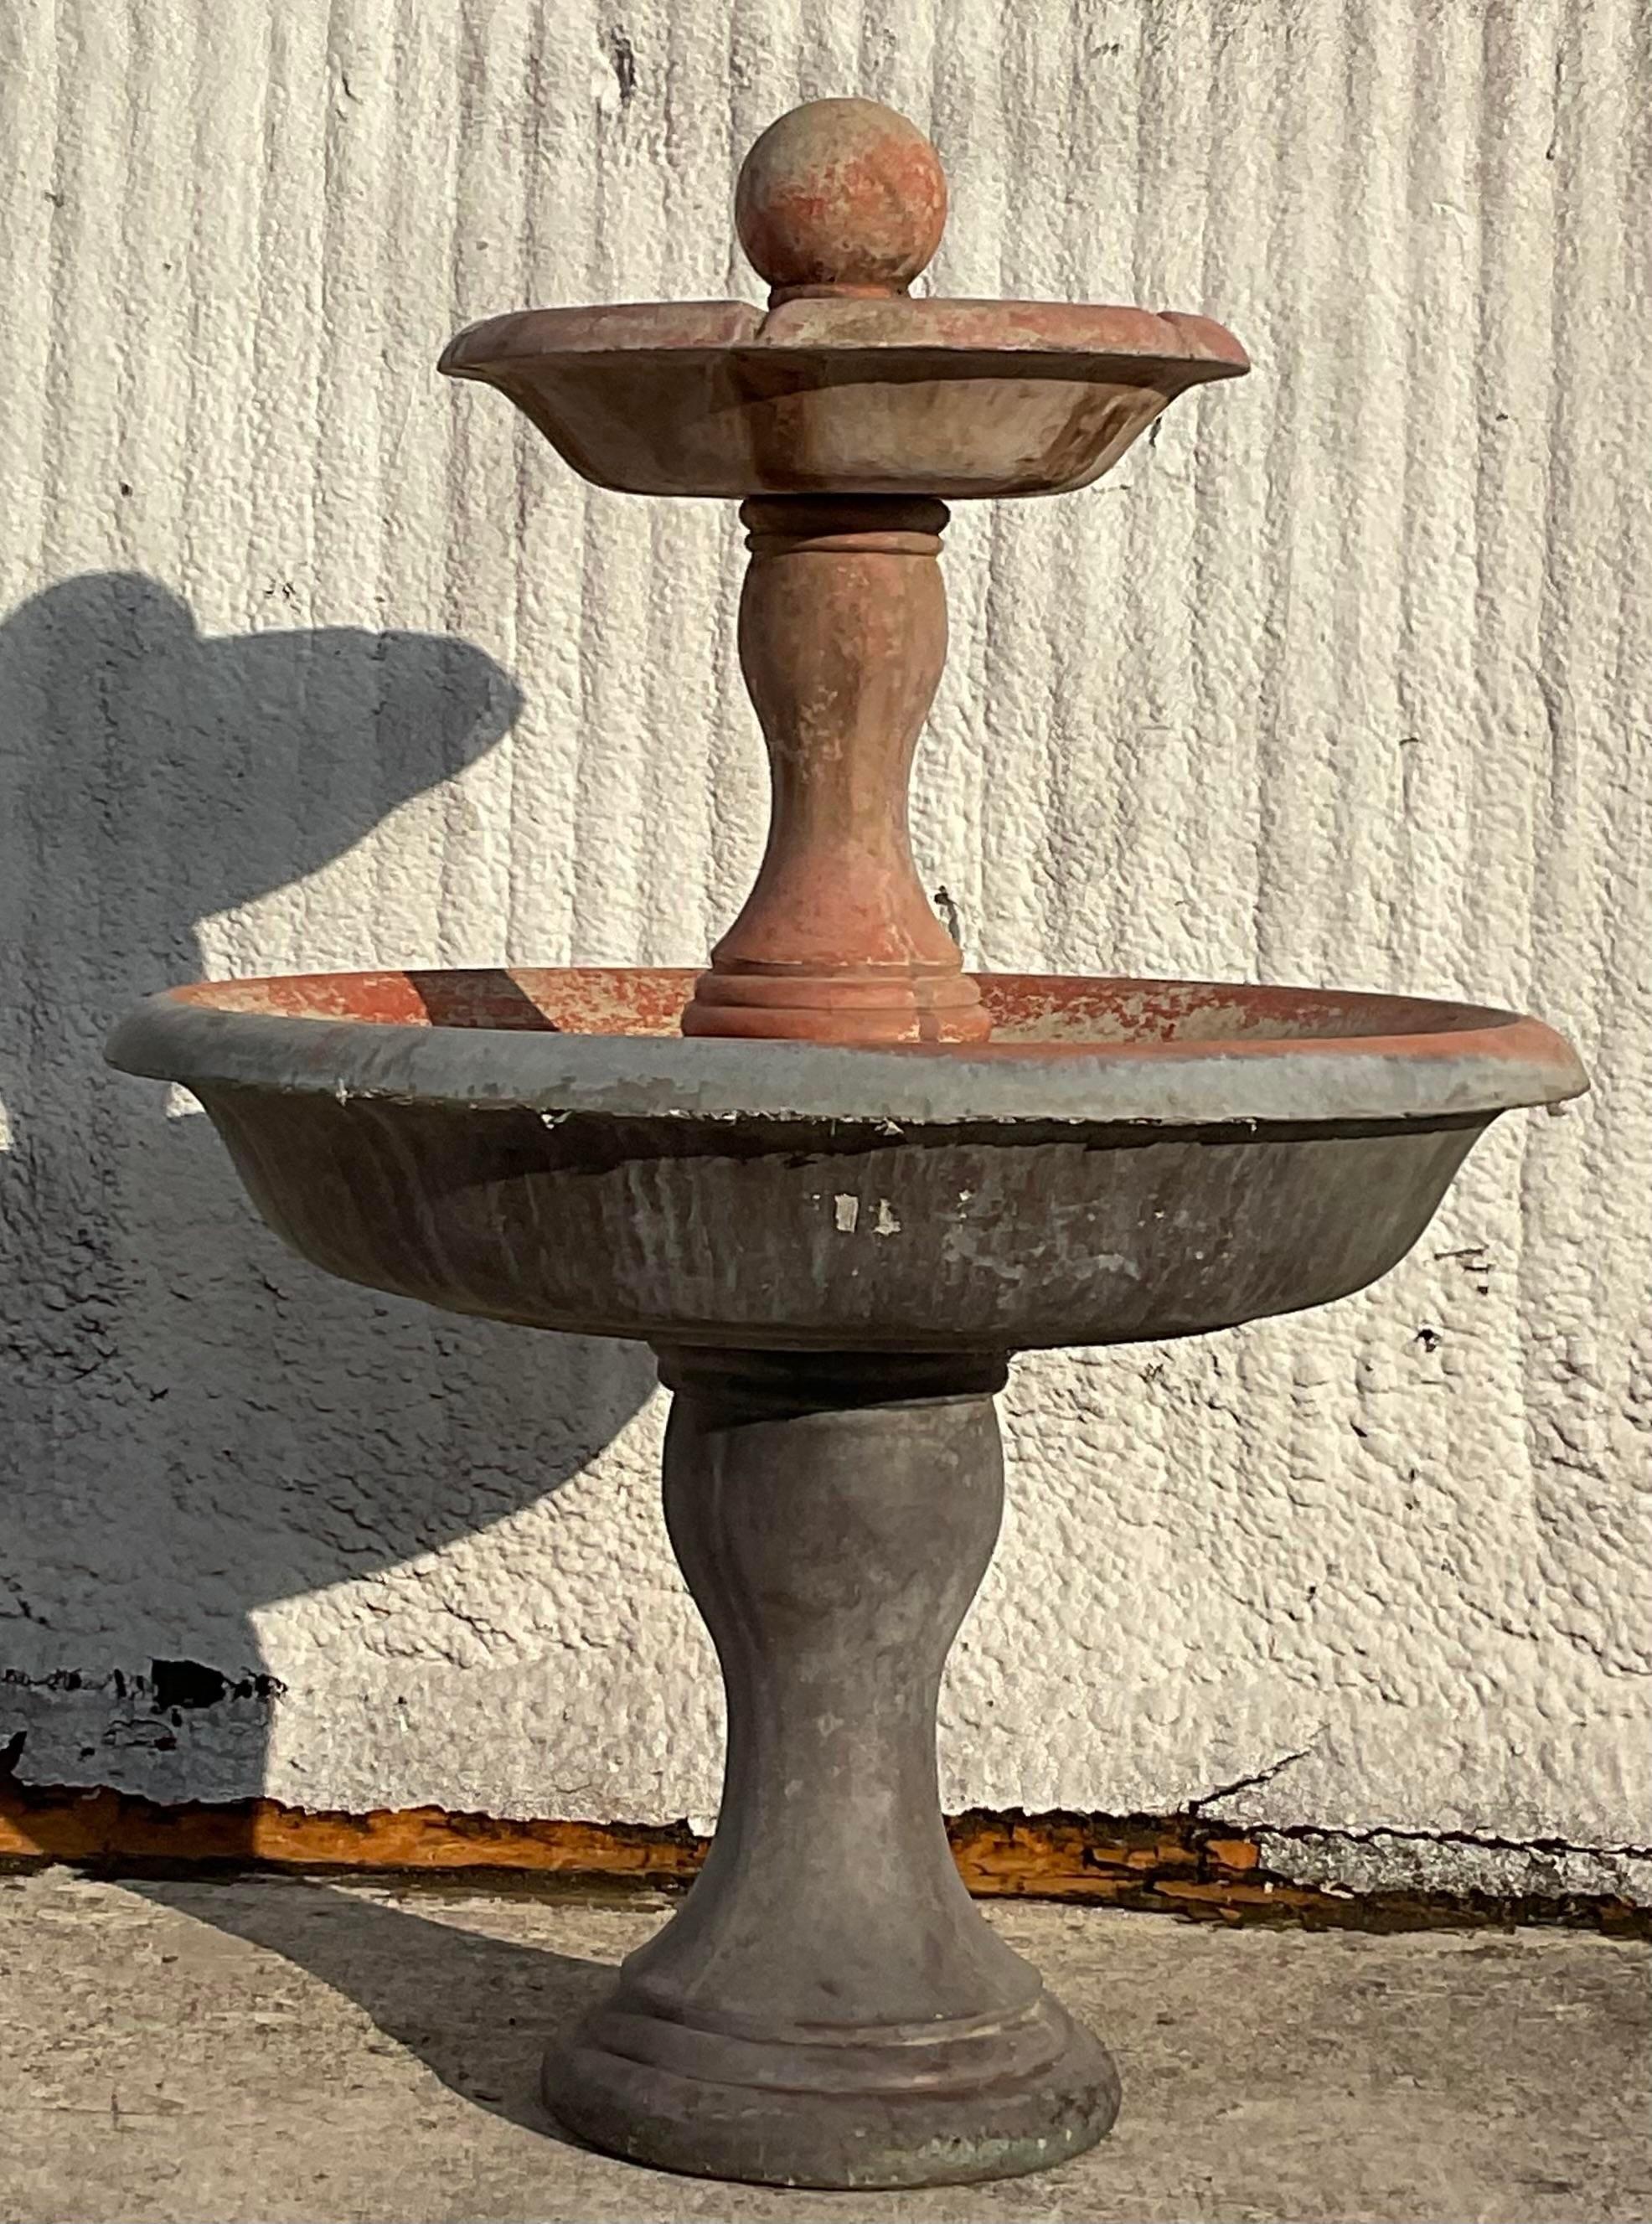 A fabulous vintage Coastal Outdoor fountain. Made from a cast concrete with a painted terra Cotta finish. Motor intact, but I have not tested it. Comes apart easily for transporting and set up. Acquired from a Ft Lauderdale estate.

Approx 175 - 200